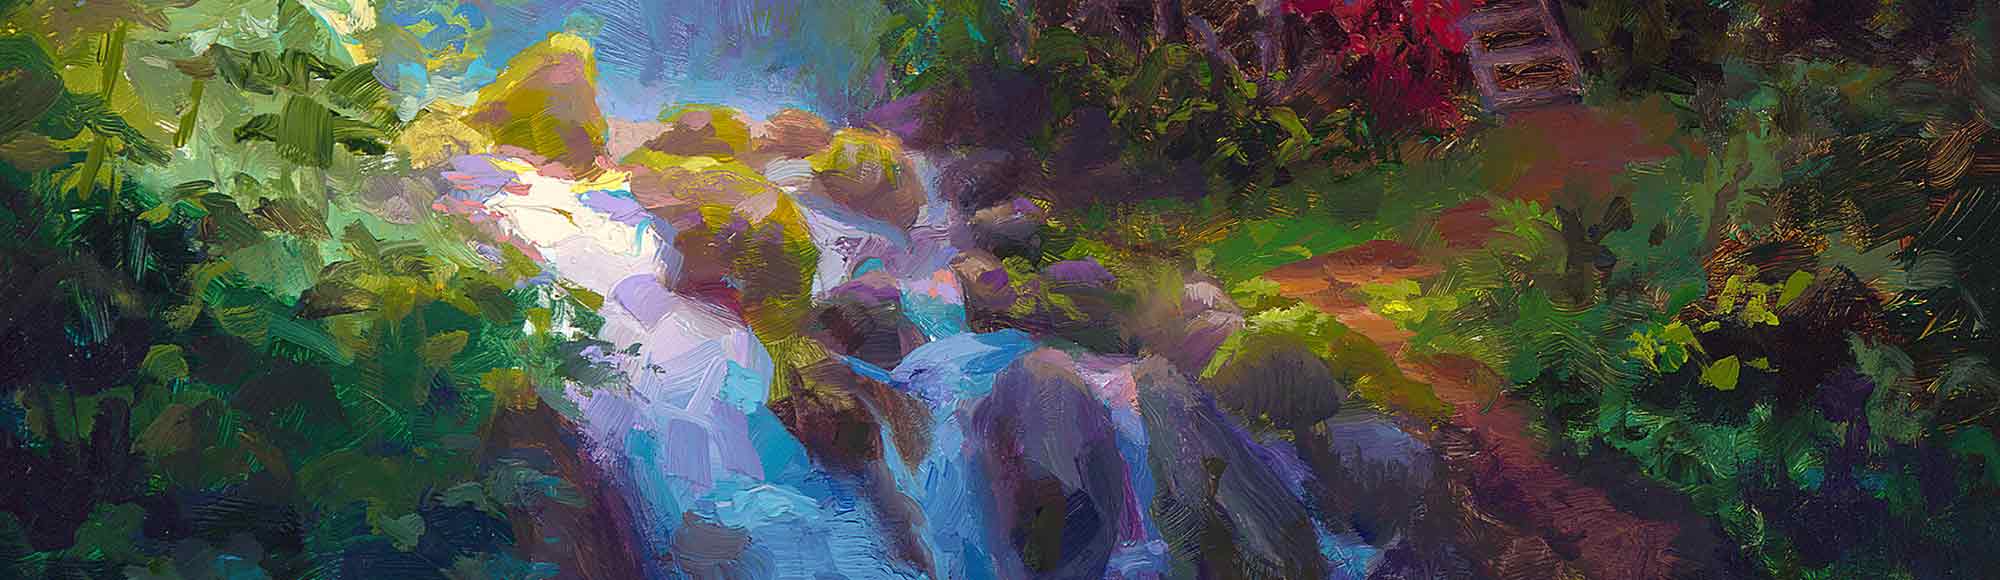 Waterfall landscape painting on canvas by tropical artist Karen Whitworth